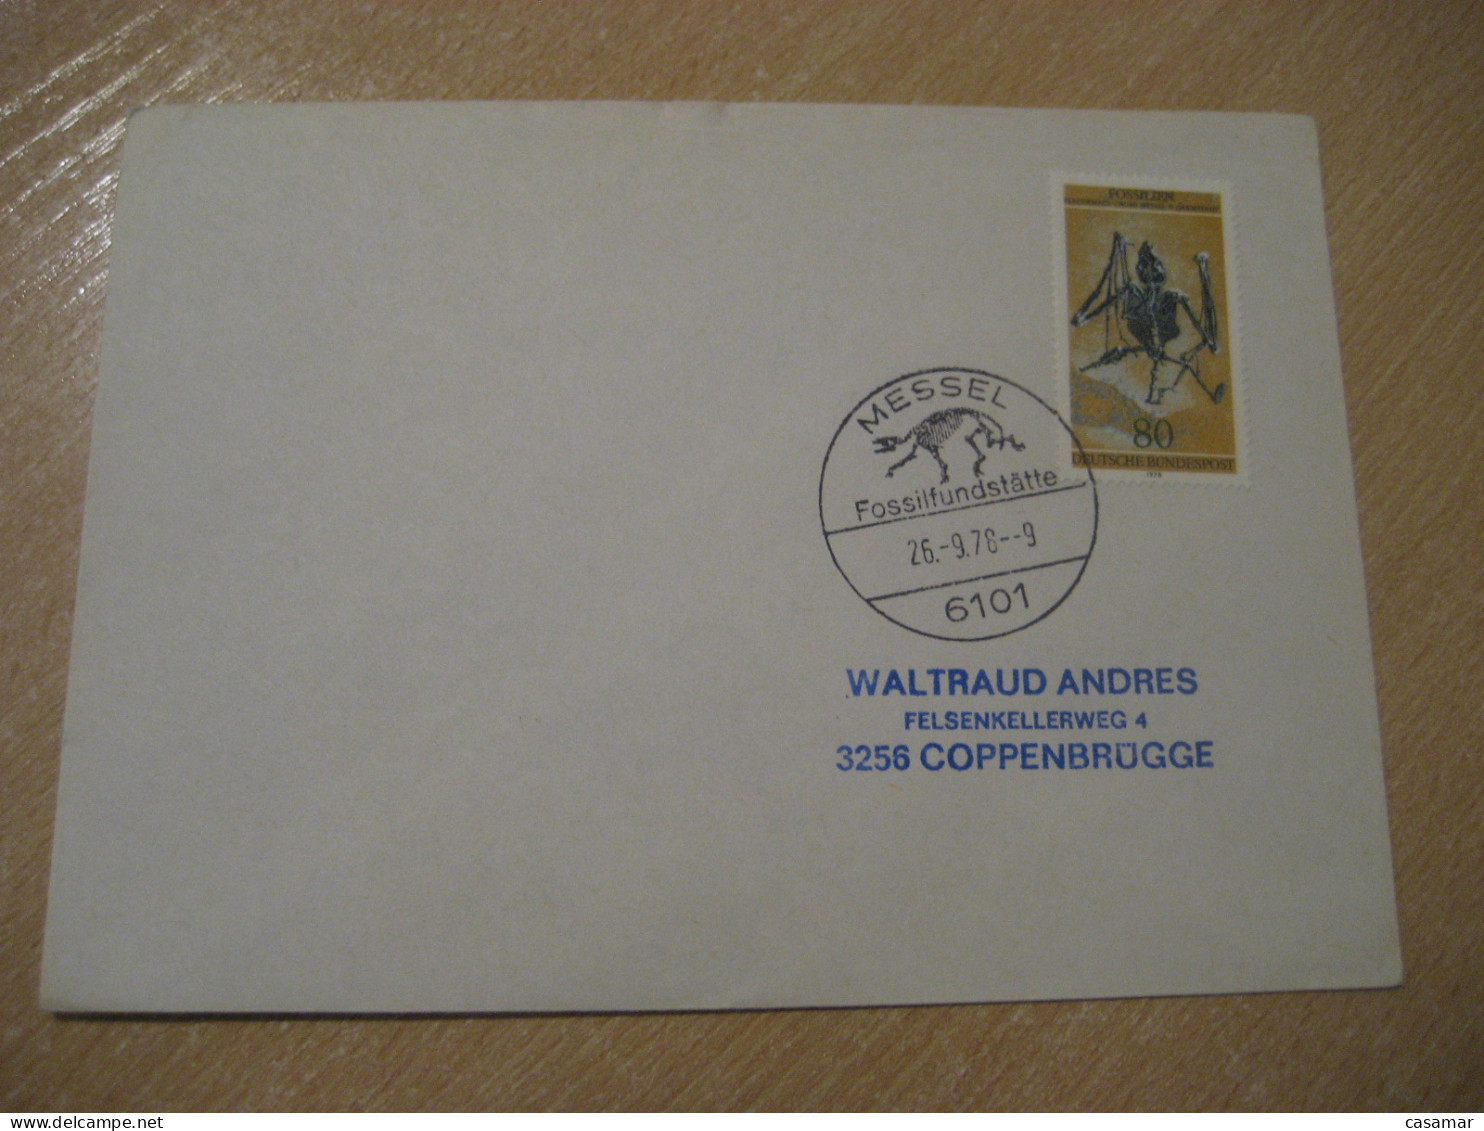 MESSEL 1978 Fossil Deposit Fledermaus Cancel Cover GERMANY Fossil Fossils Animals Fossiles Geology Geologie - Fossiles